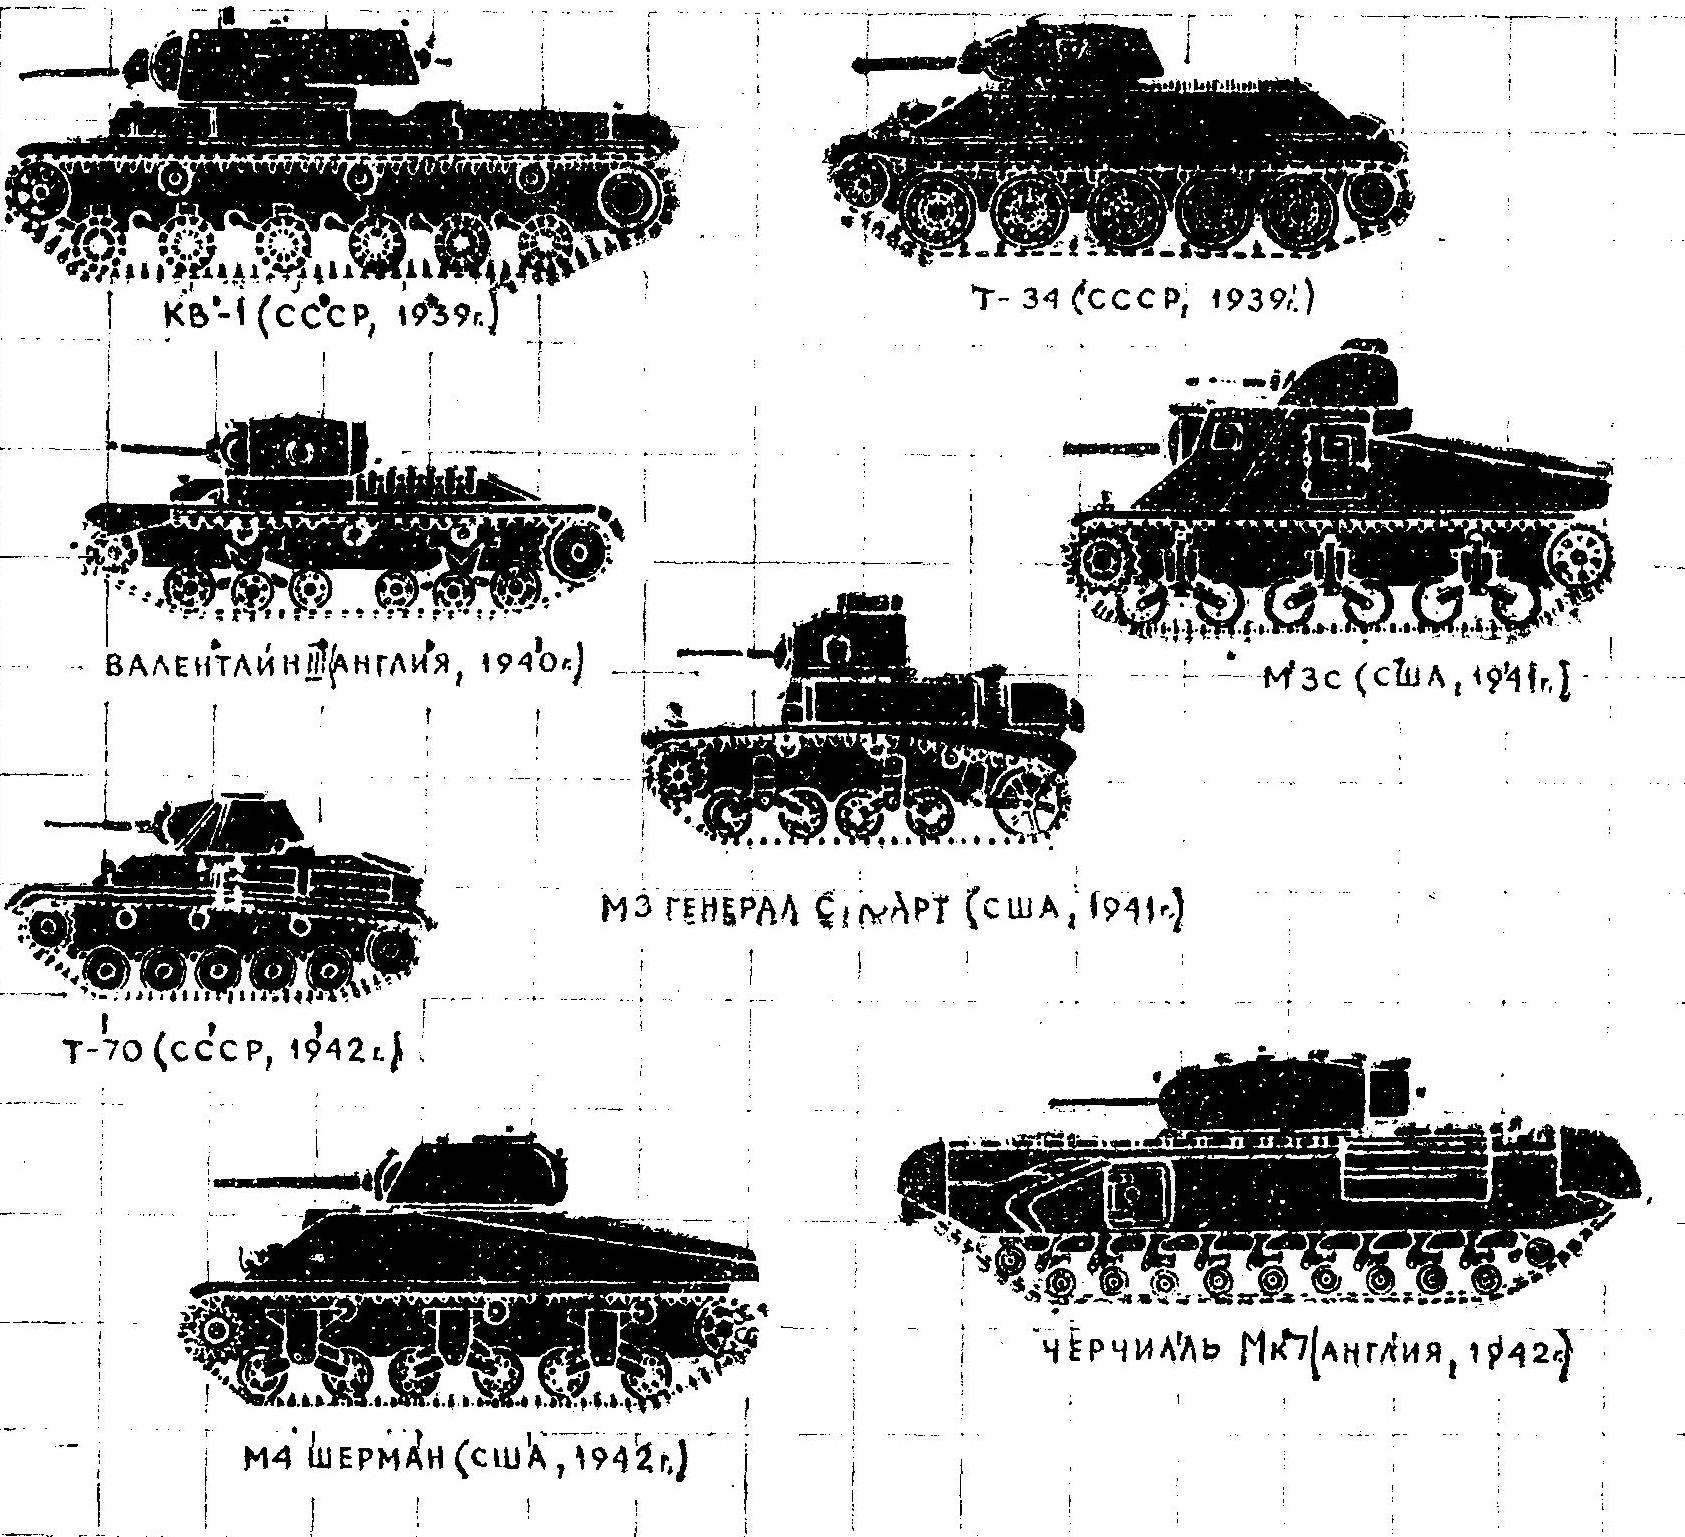 Fig. 7. Comparative sizes and silhouettes of tanks of the period 1939-1942.